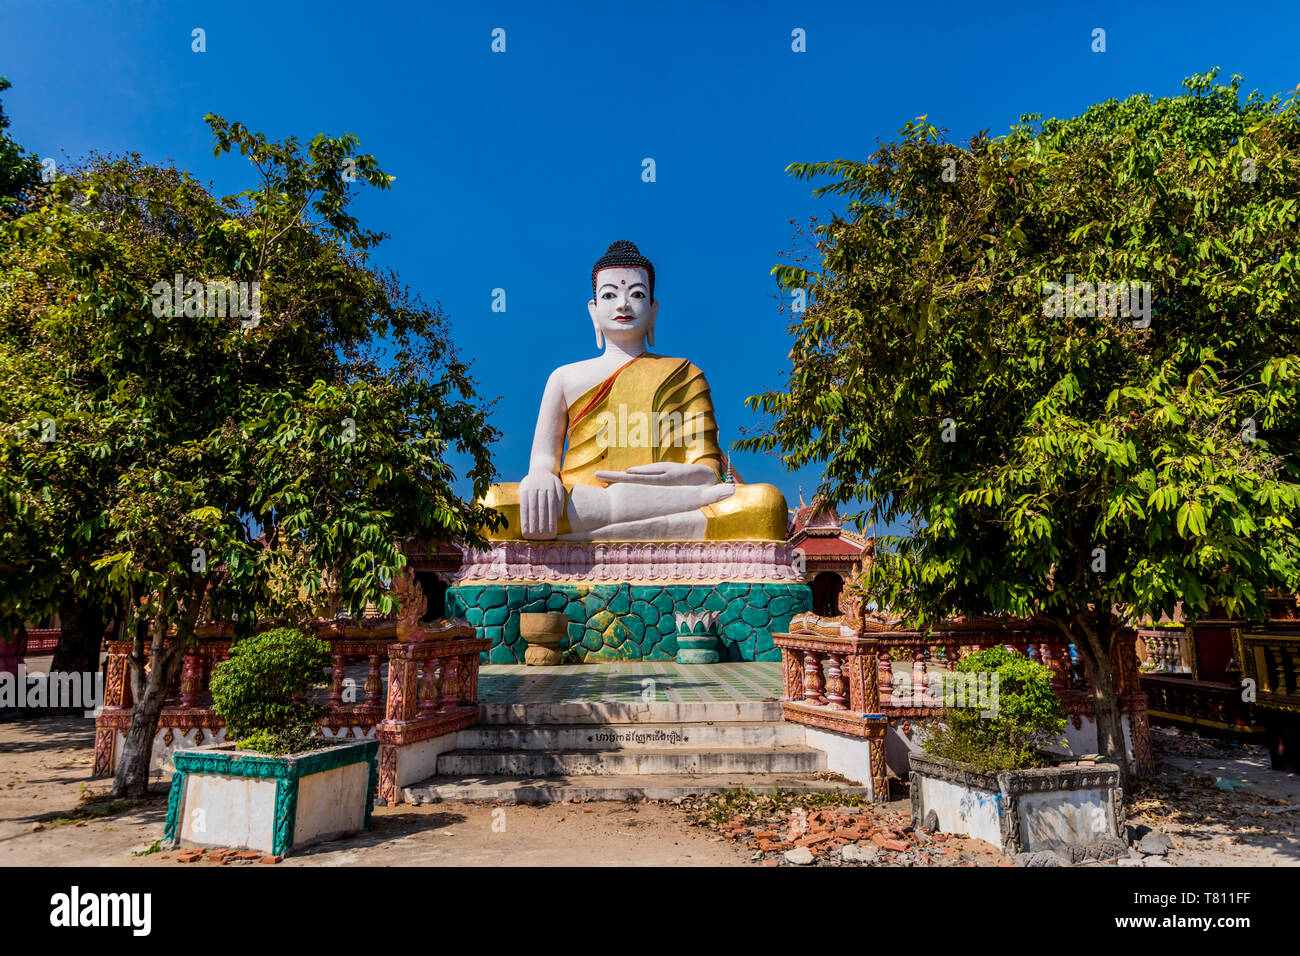 Angkor Ban temples and statues in Kampong Cham, Cambodia, Indochina, Southeast Asia, Asia Stock Photo